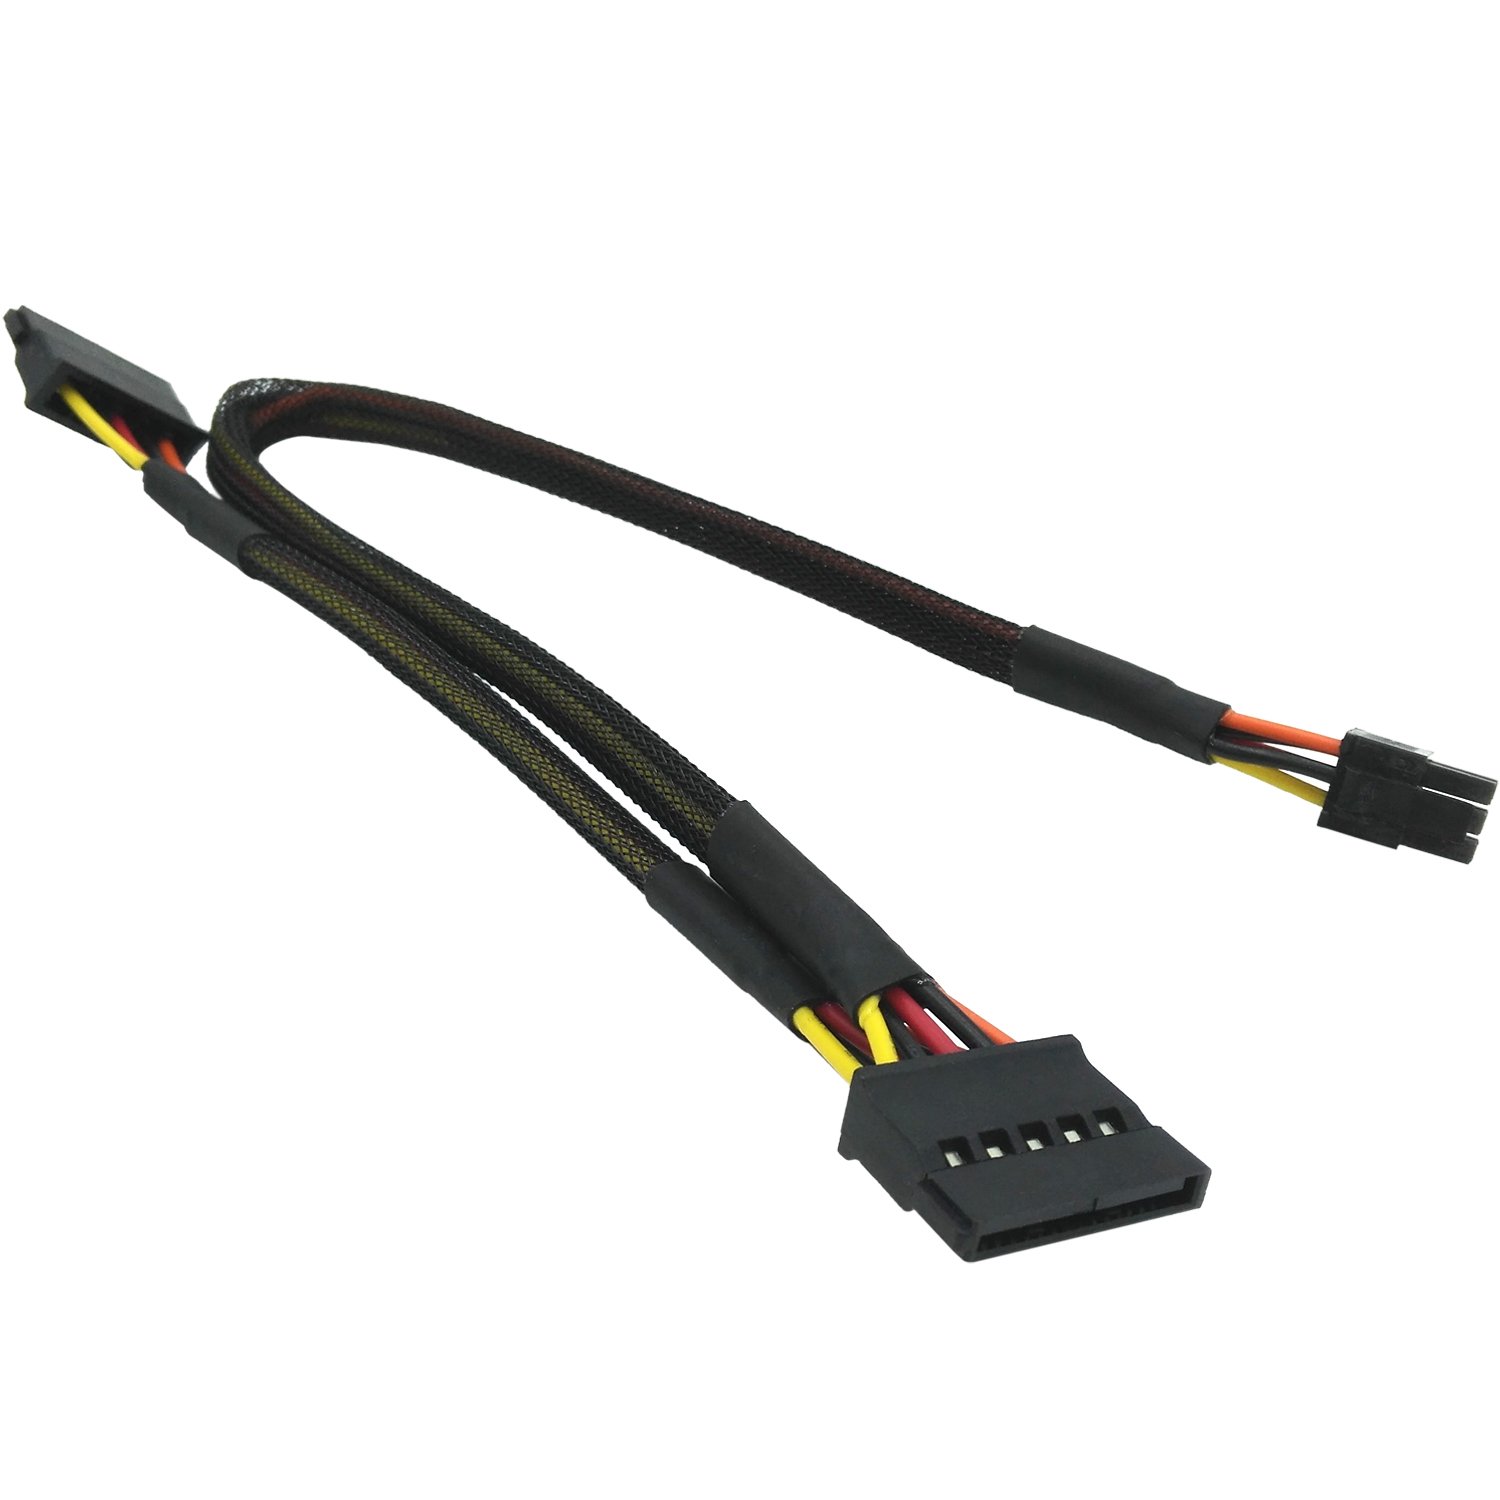 what is the mac mini power cable called